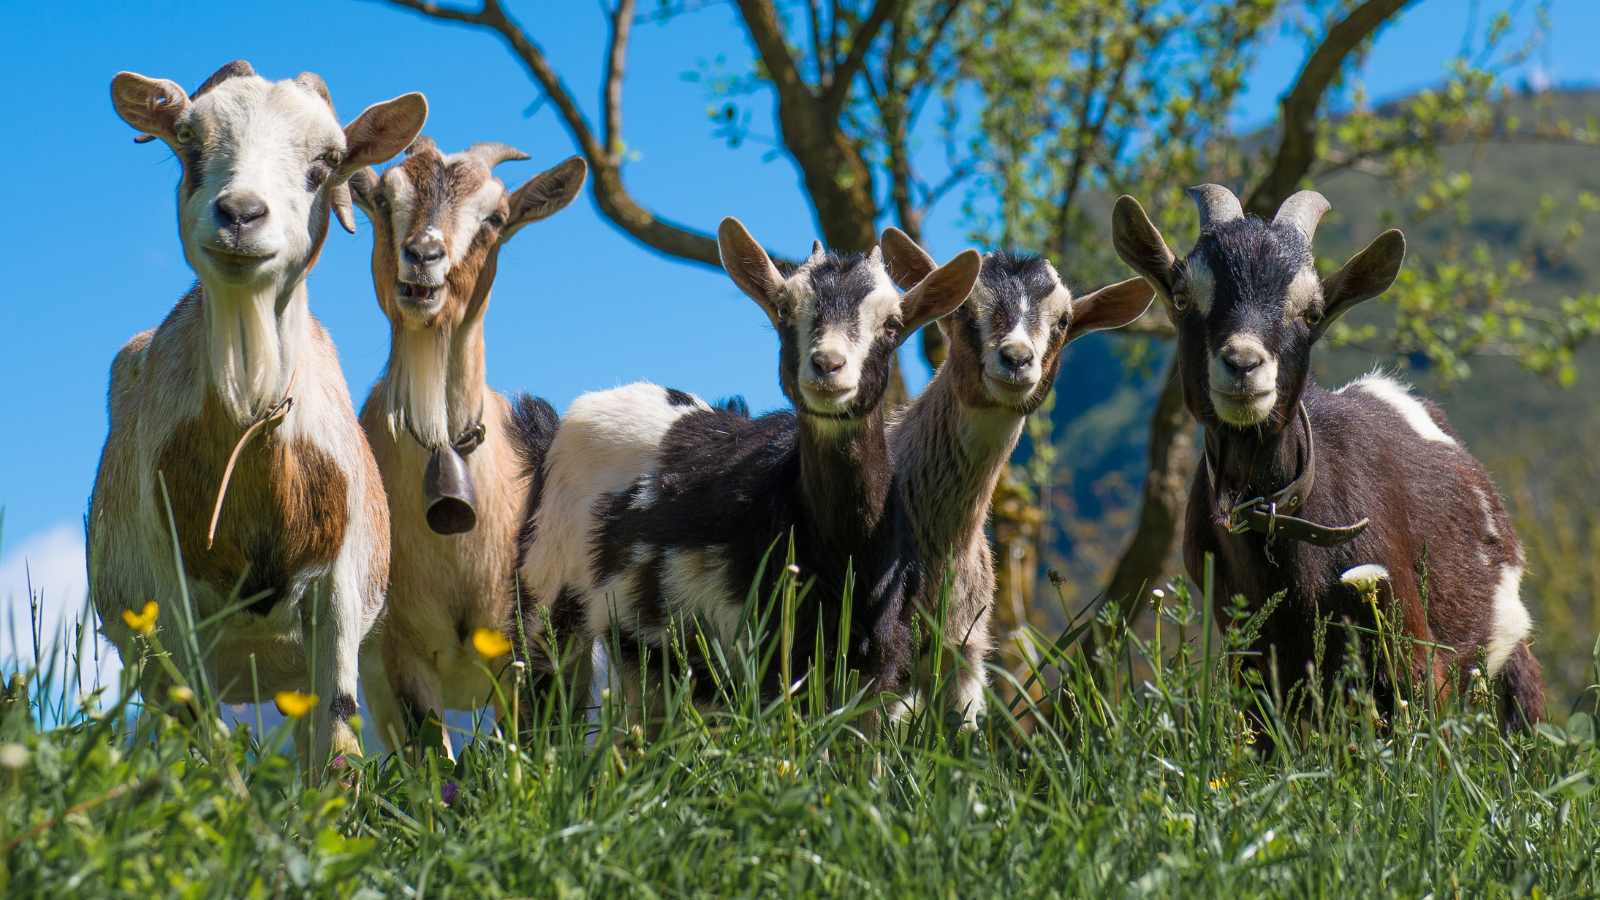 Five spotted goats of multiple colors stand and stare in a meadow.